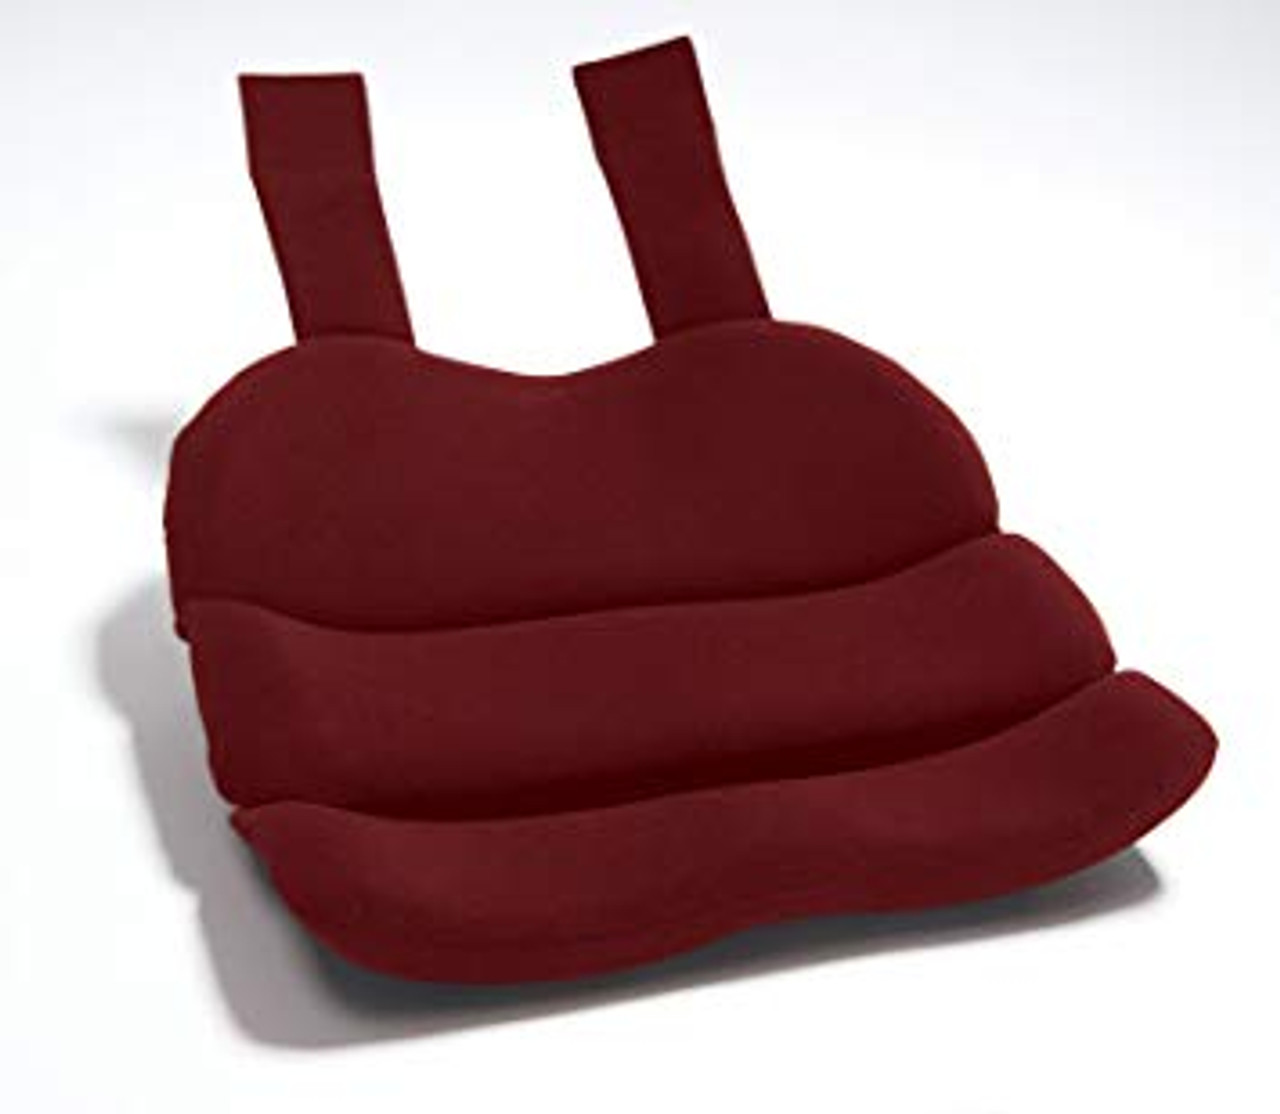 ObusForme® ST-BRG-CA Contoured Seat Cushion encourages pelvic alignment